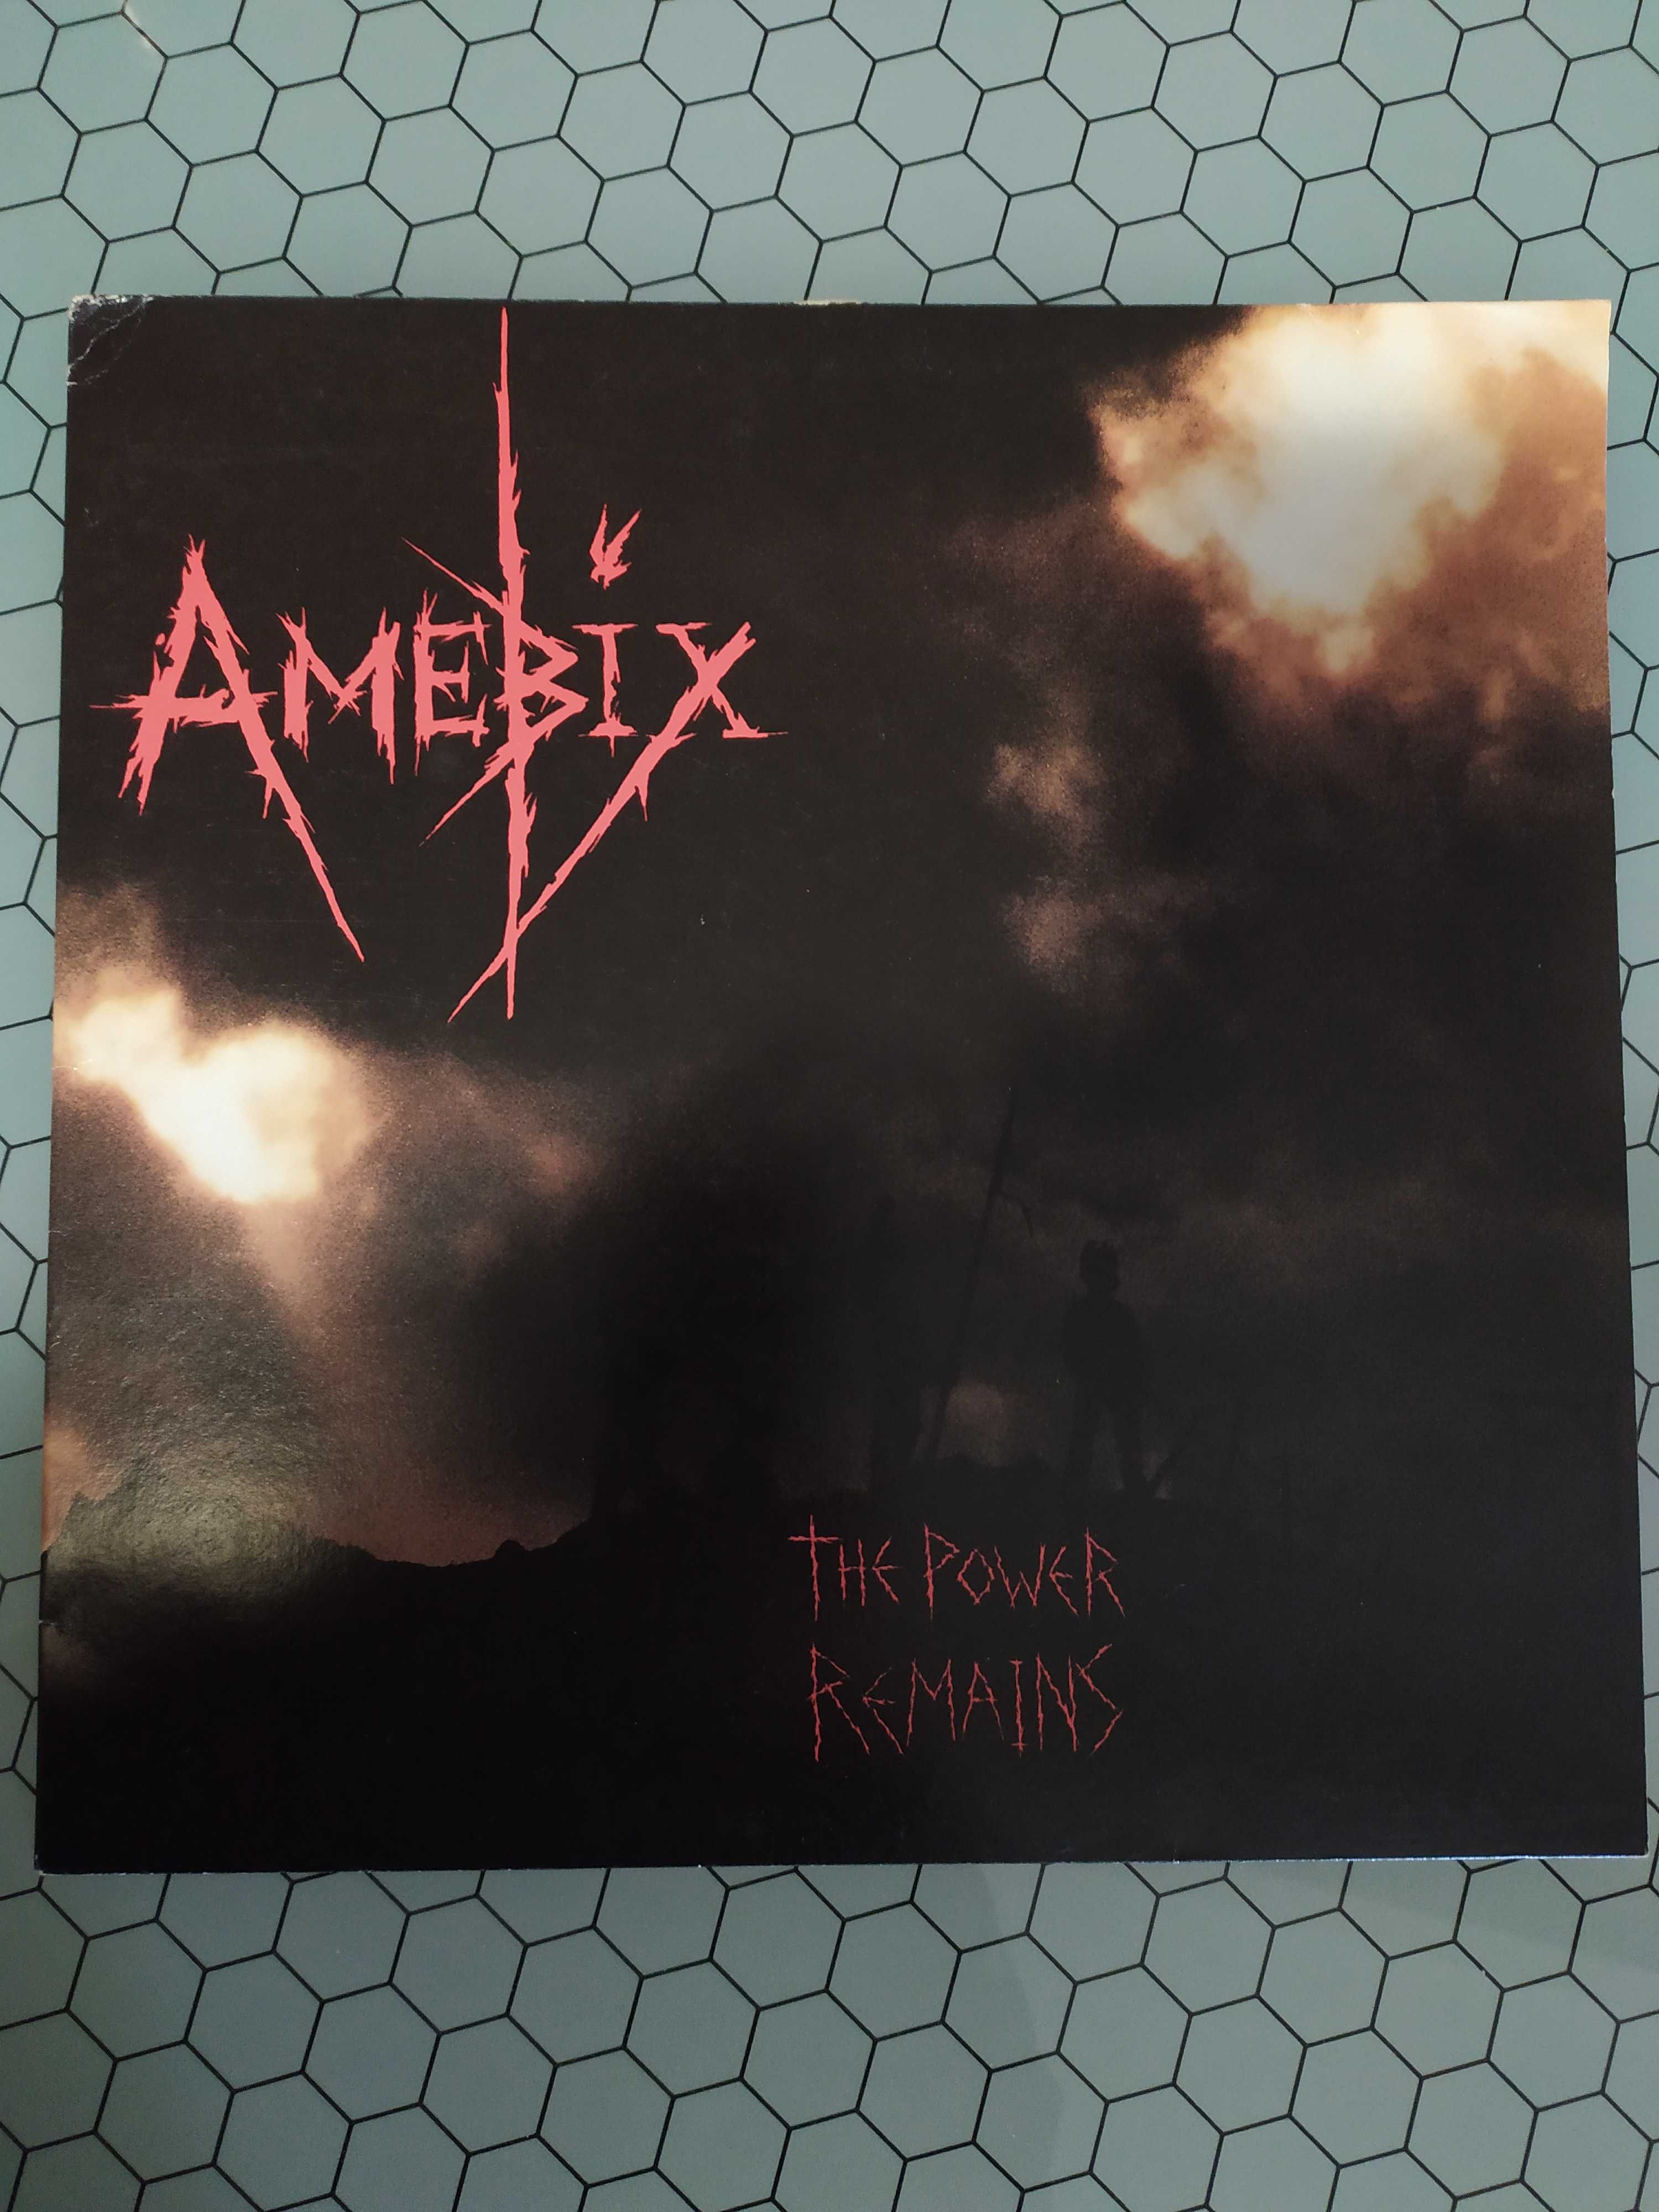 Amebix – The Power Remains LP 1993 Skuld Releases